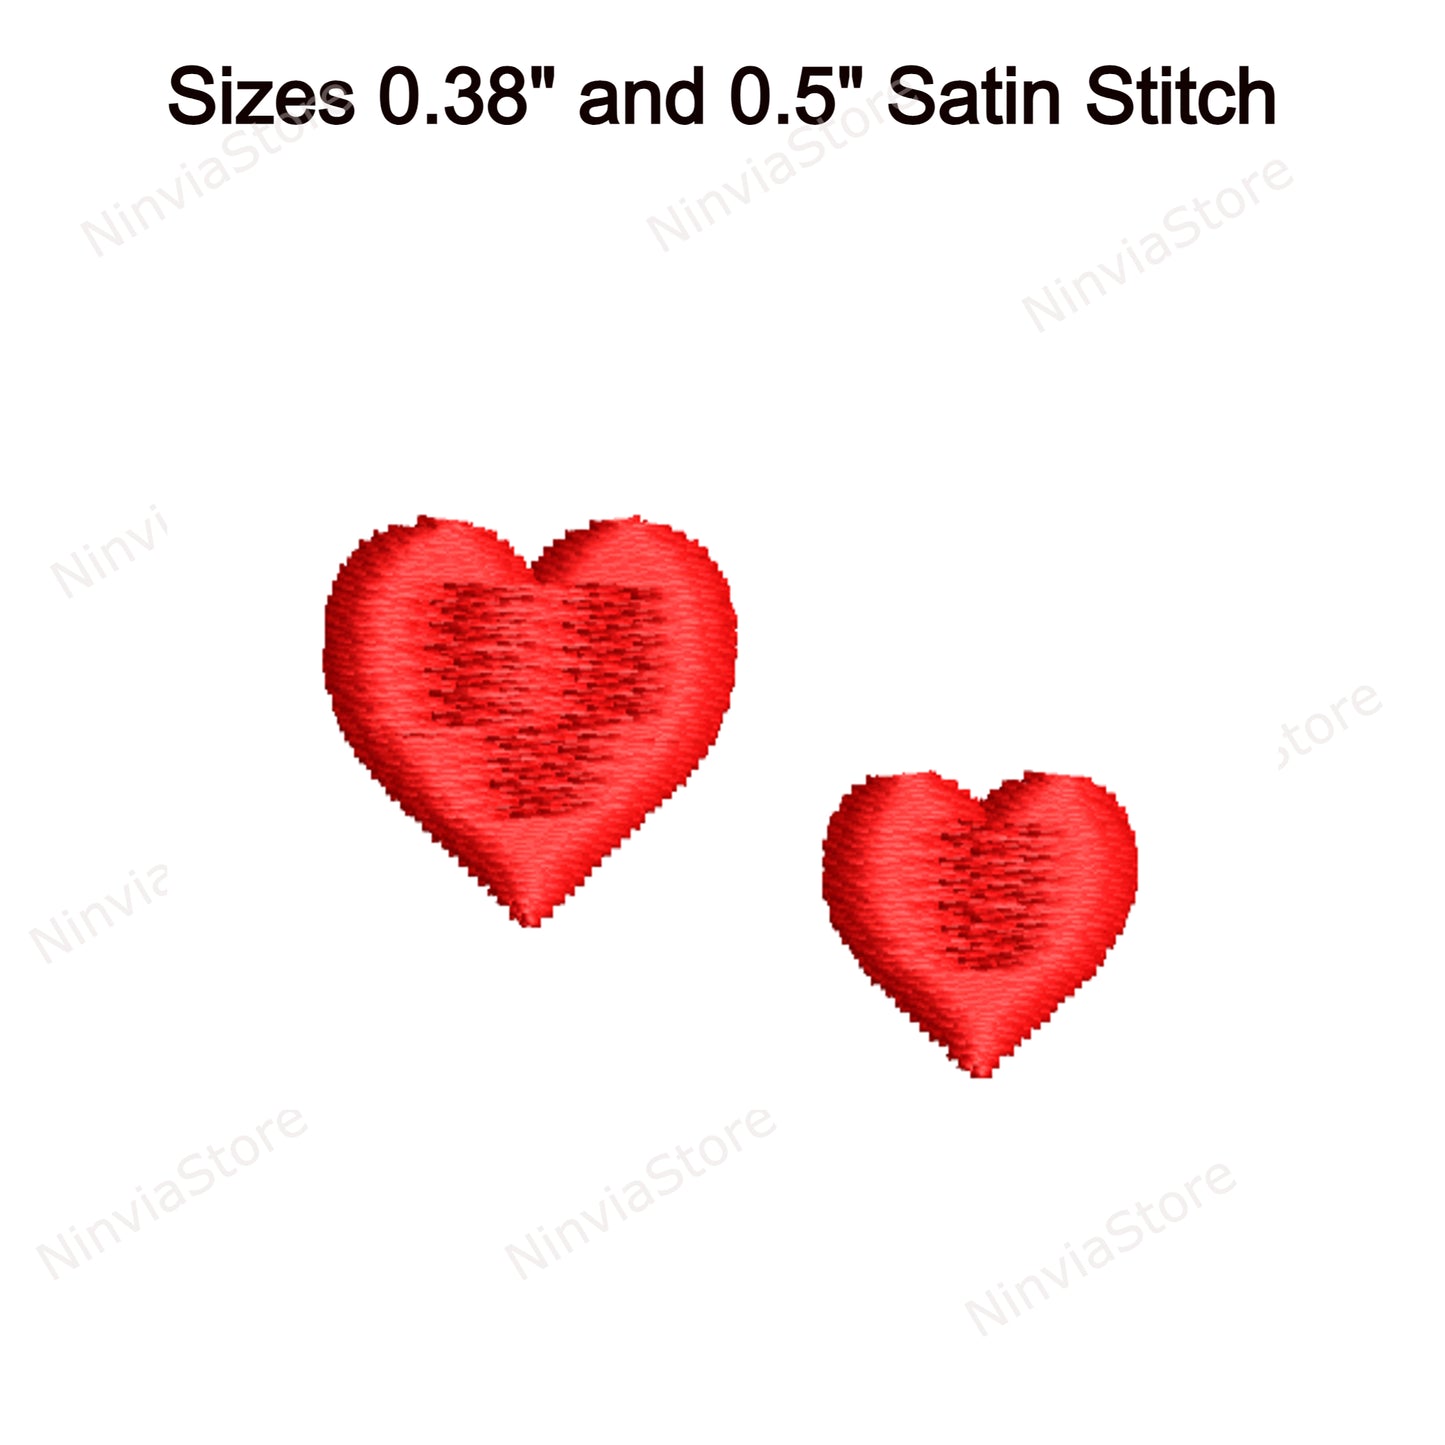 Heart Embroidery Design, 24 Sizes, 8 formats, Heart Machine Embroidery, Valentine's Day, Heart Embroidery Pattern